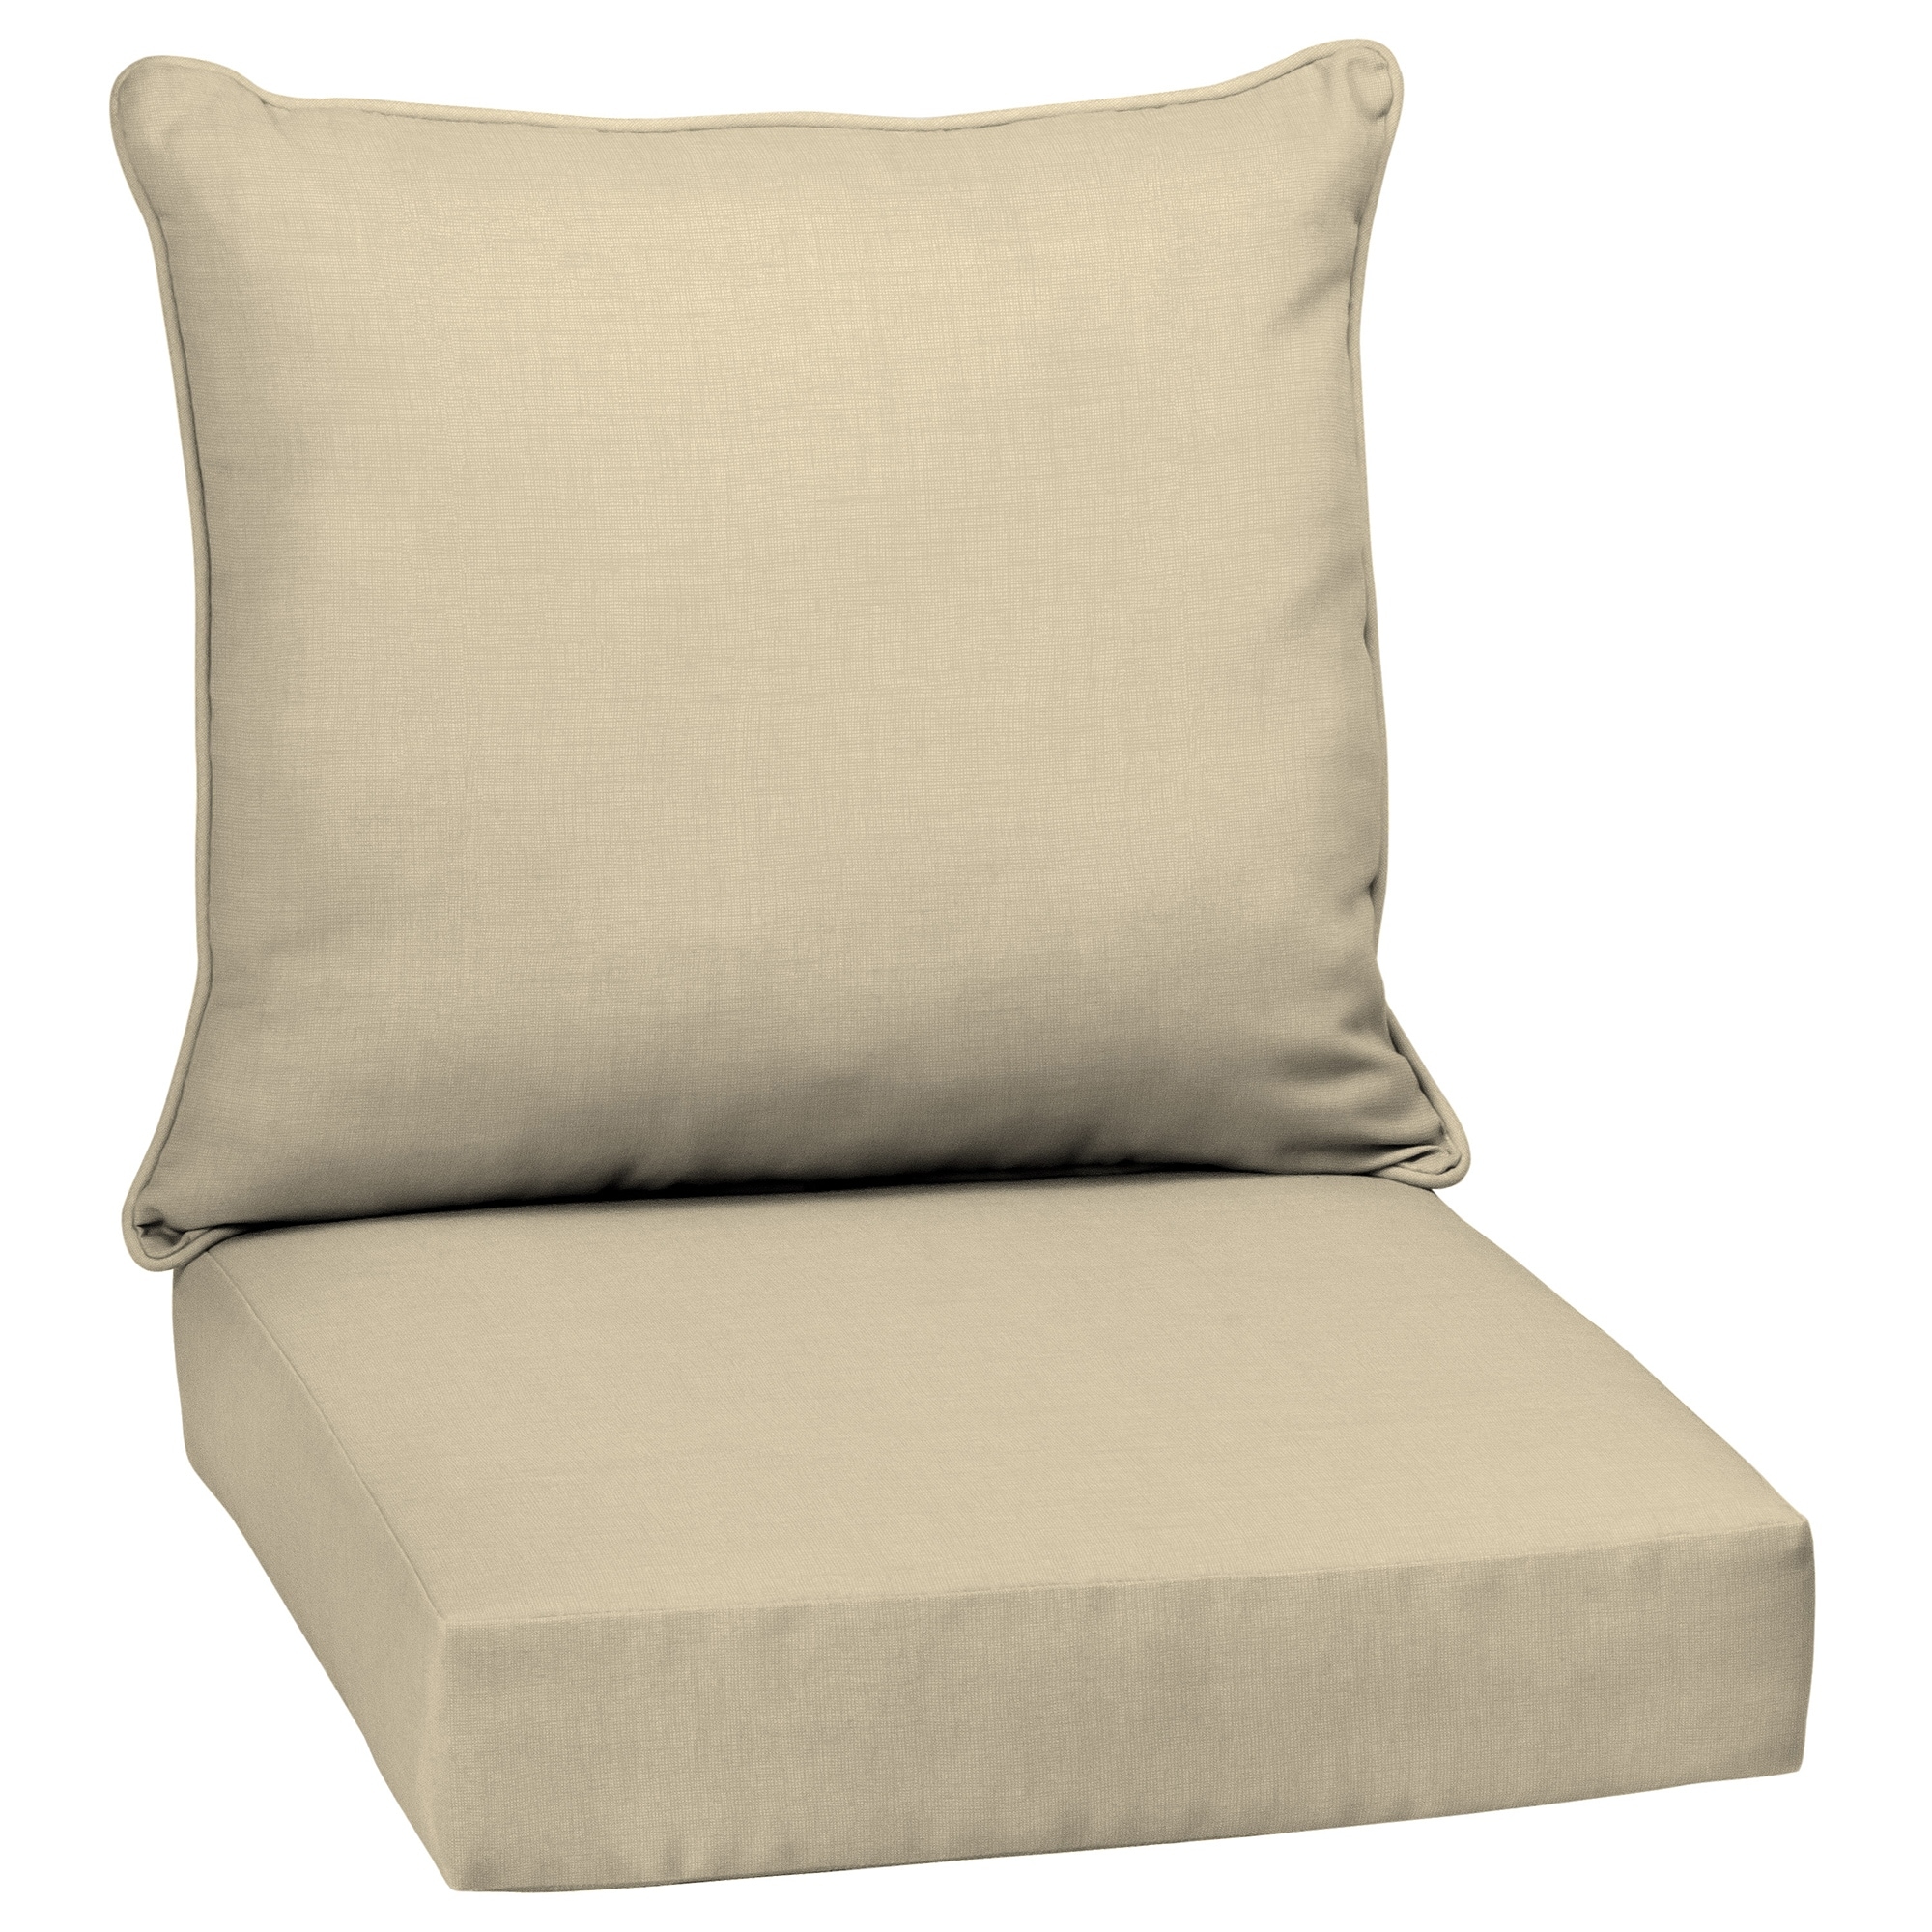 Arden Selections Tan Outdoor Deep Seat Cushion Set - 24 W x 24 D in.